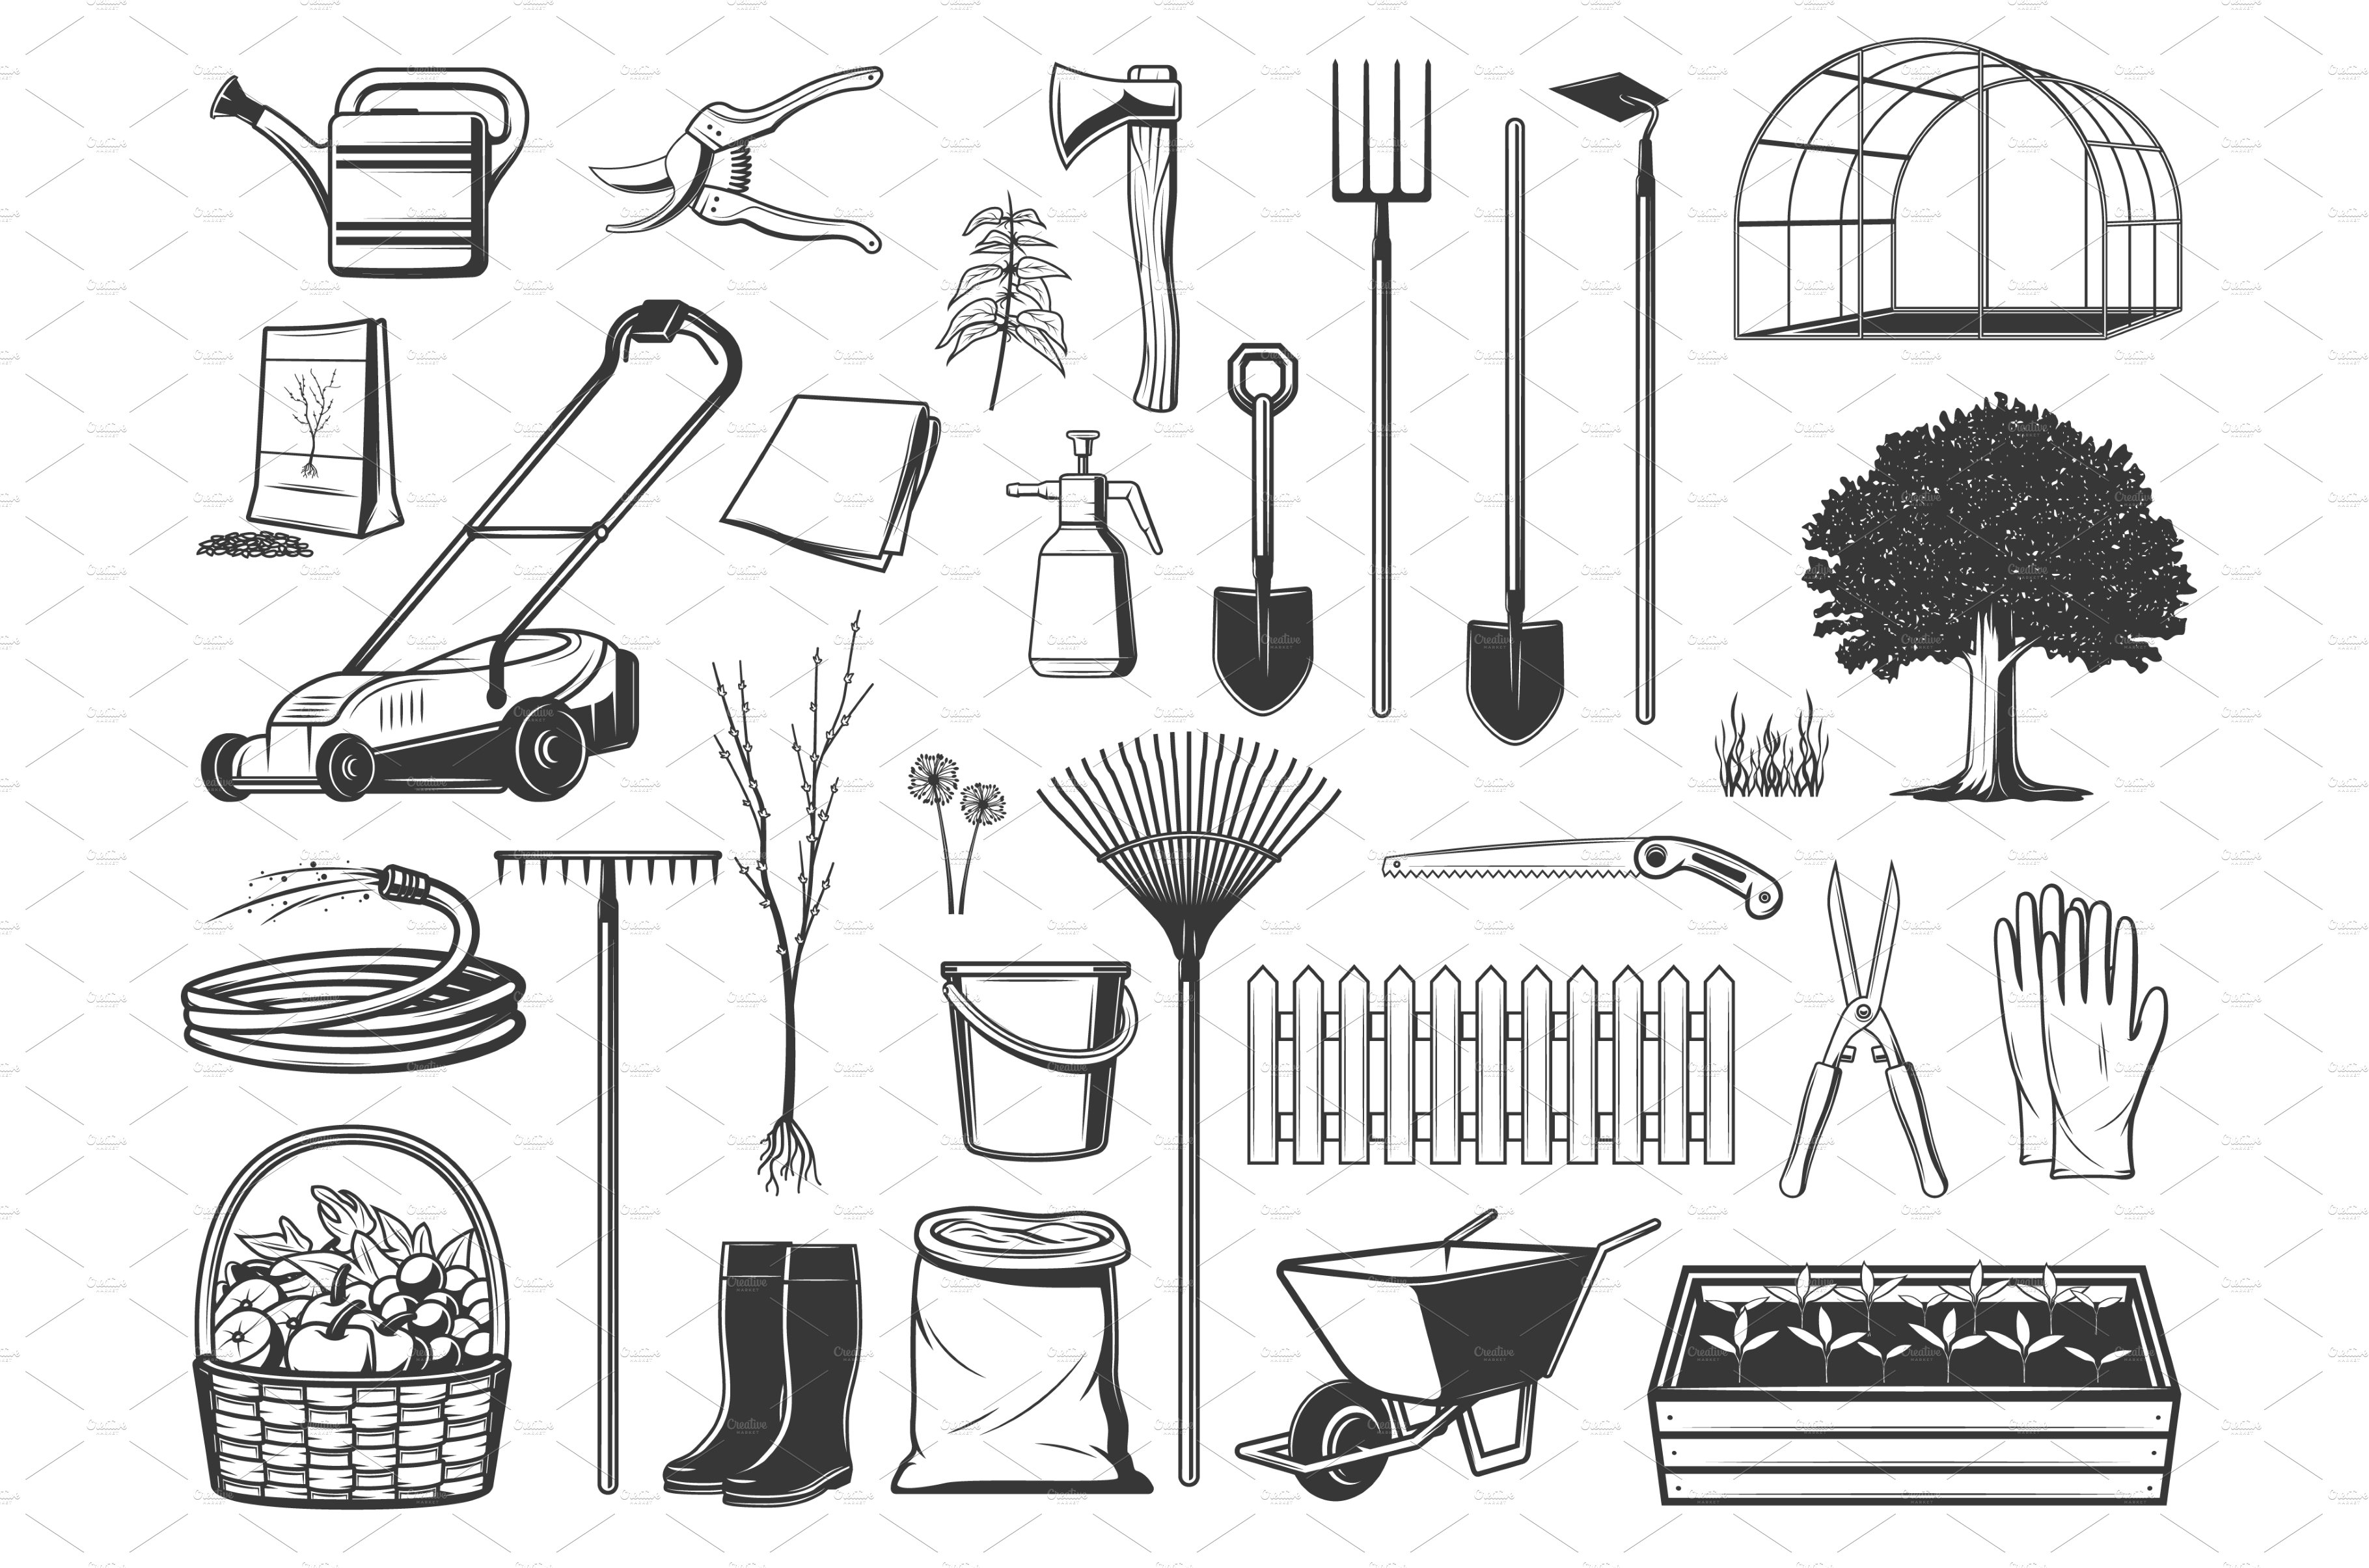 Gardening Tools Sketches for Farming Design | Farm design, Garden tools,  Garden hand tools